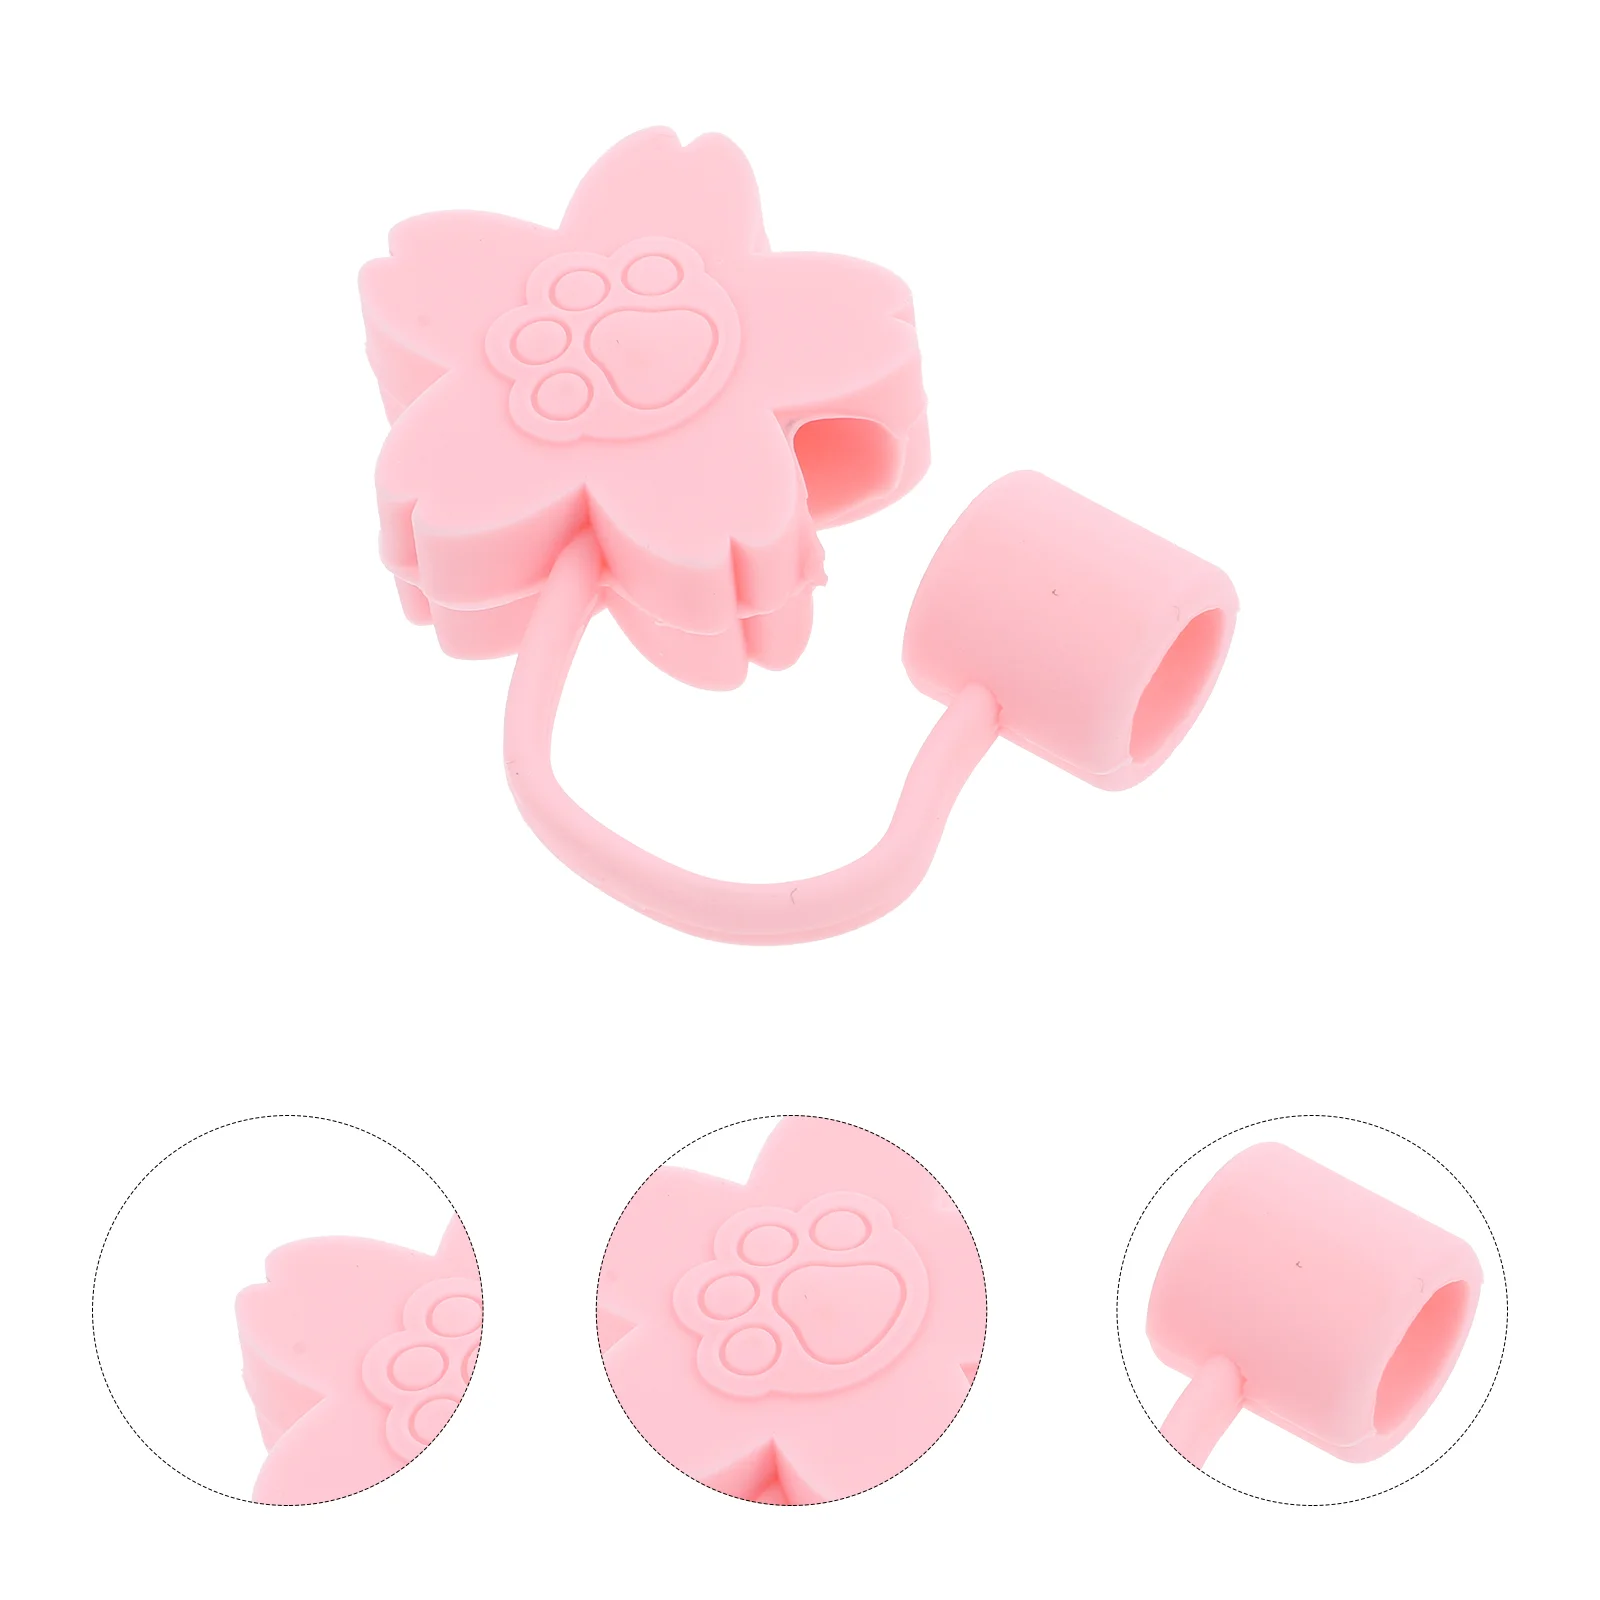 

8 Pcs Cherry Blossom Decor Straw Dust Cap Tips Plug Party Covers Reusable Creative Shape Stopper Lovely Design Child